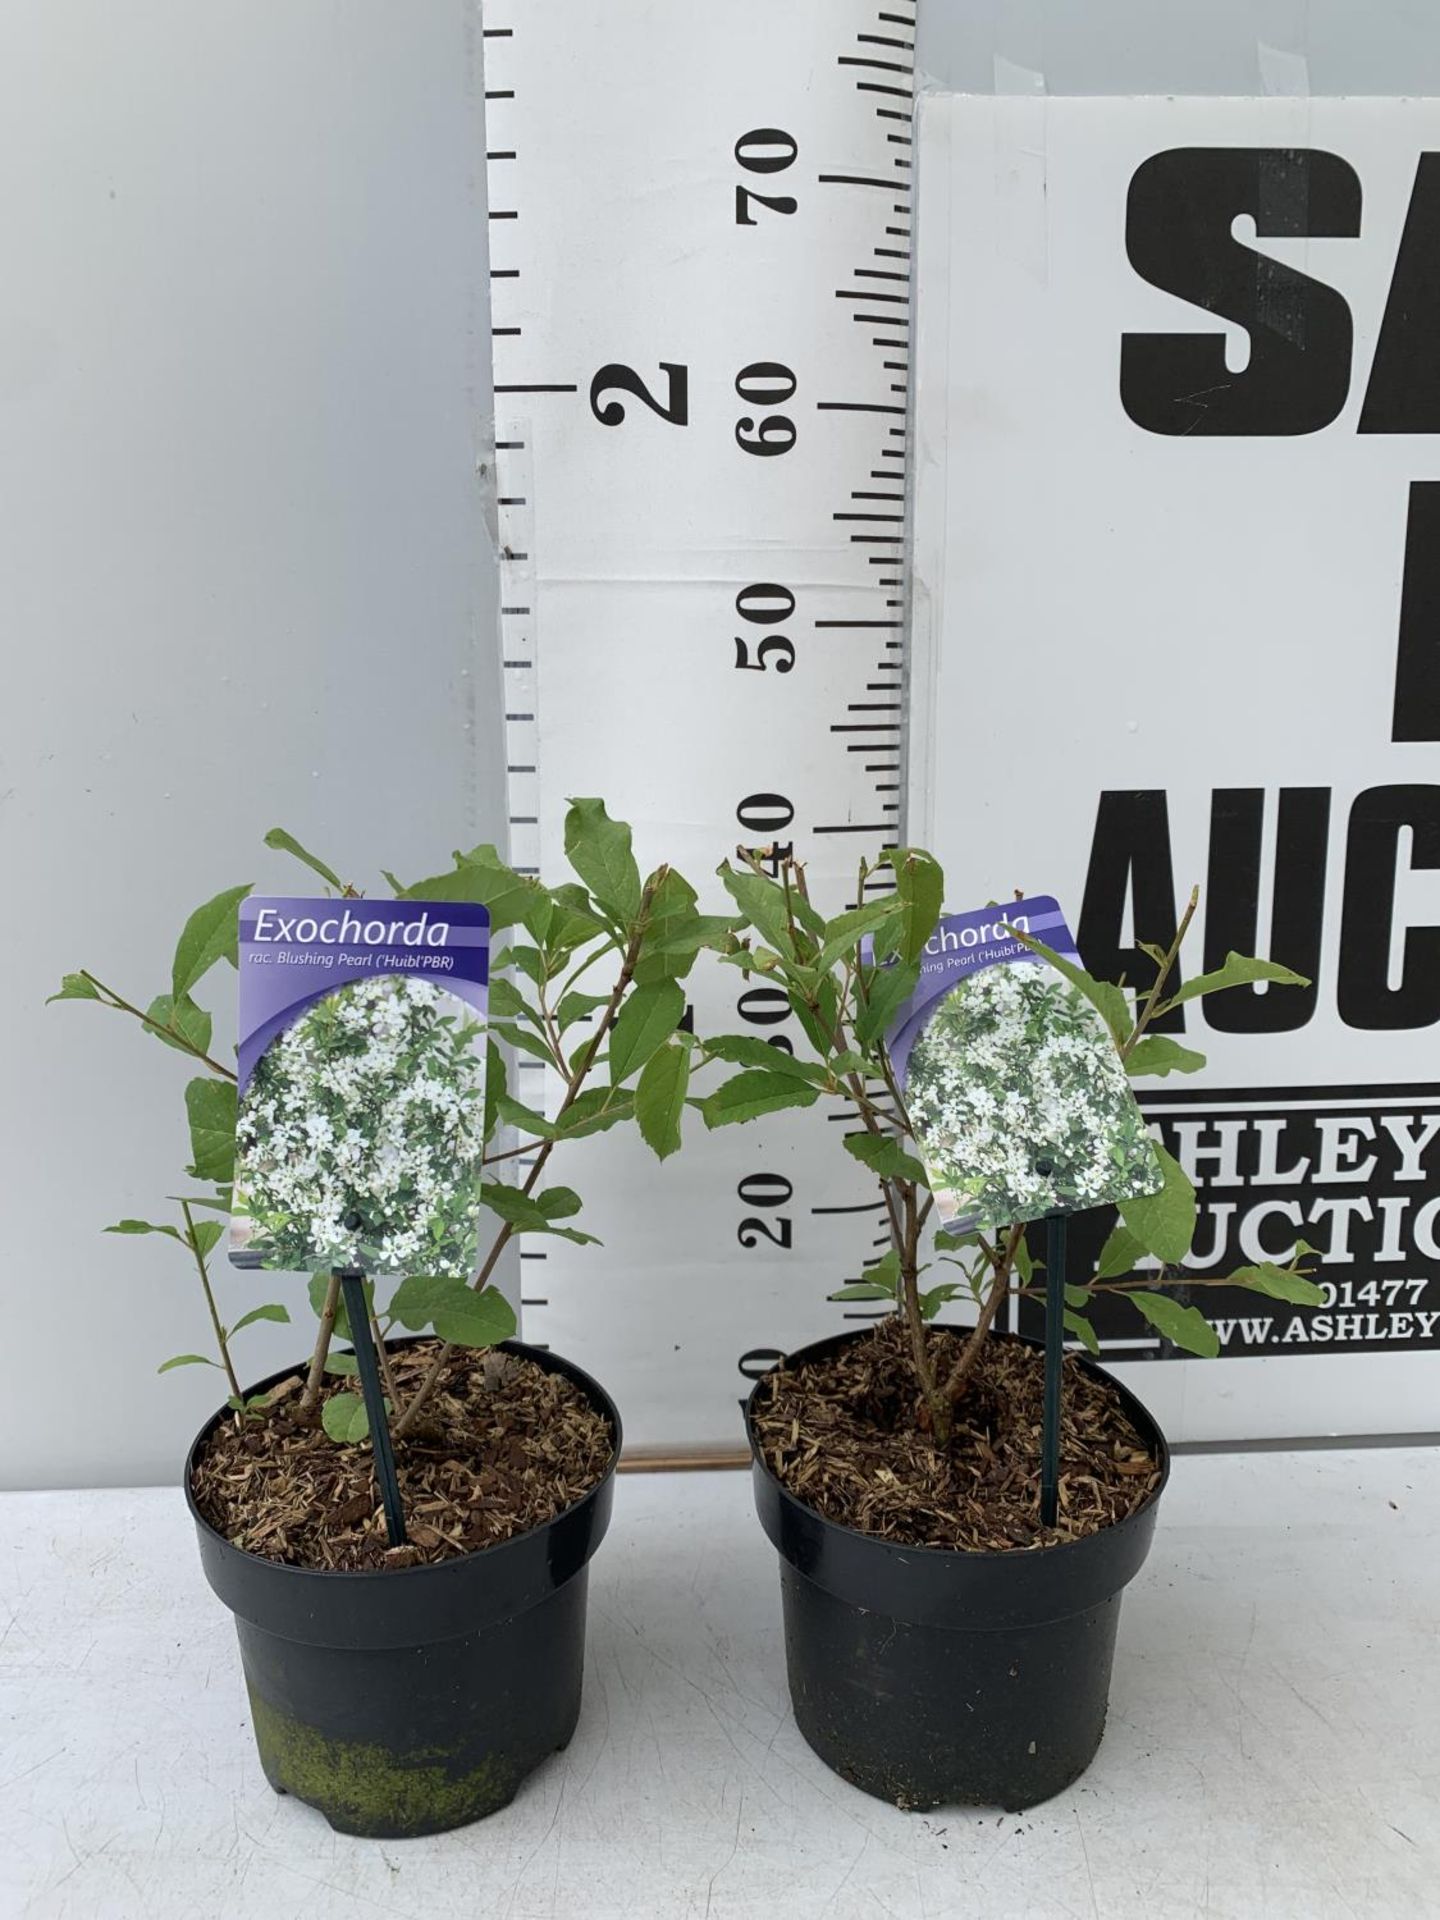 TWO EXOCHORDA BLUSHING PEARL IN 2 LTR POTS 40CM TALL PLUS VAT TO BE SOLD FOR THE TWO